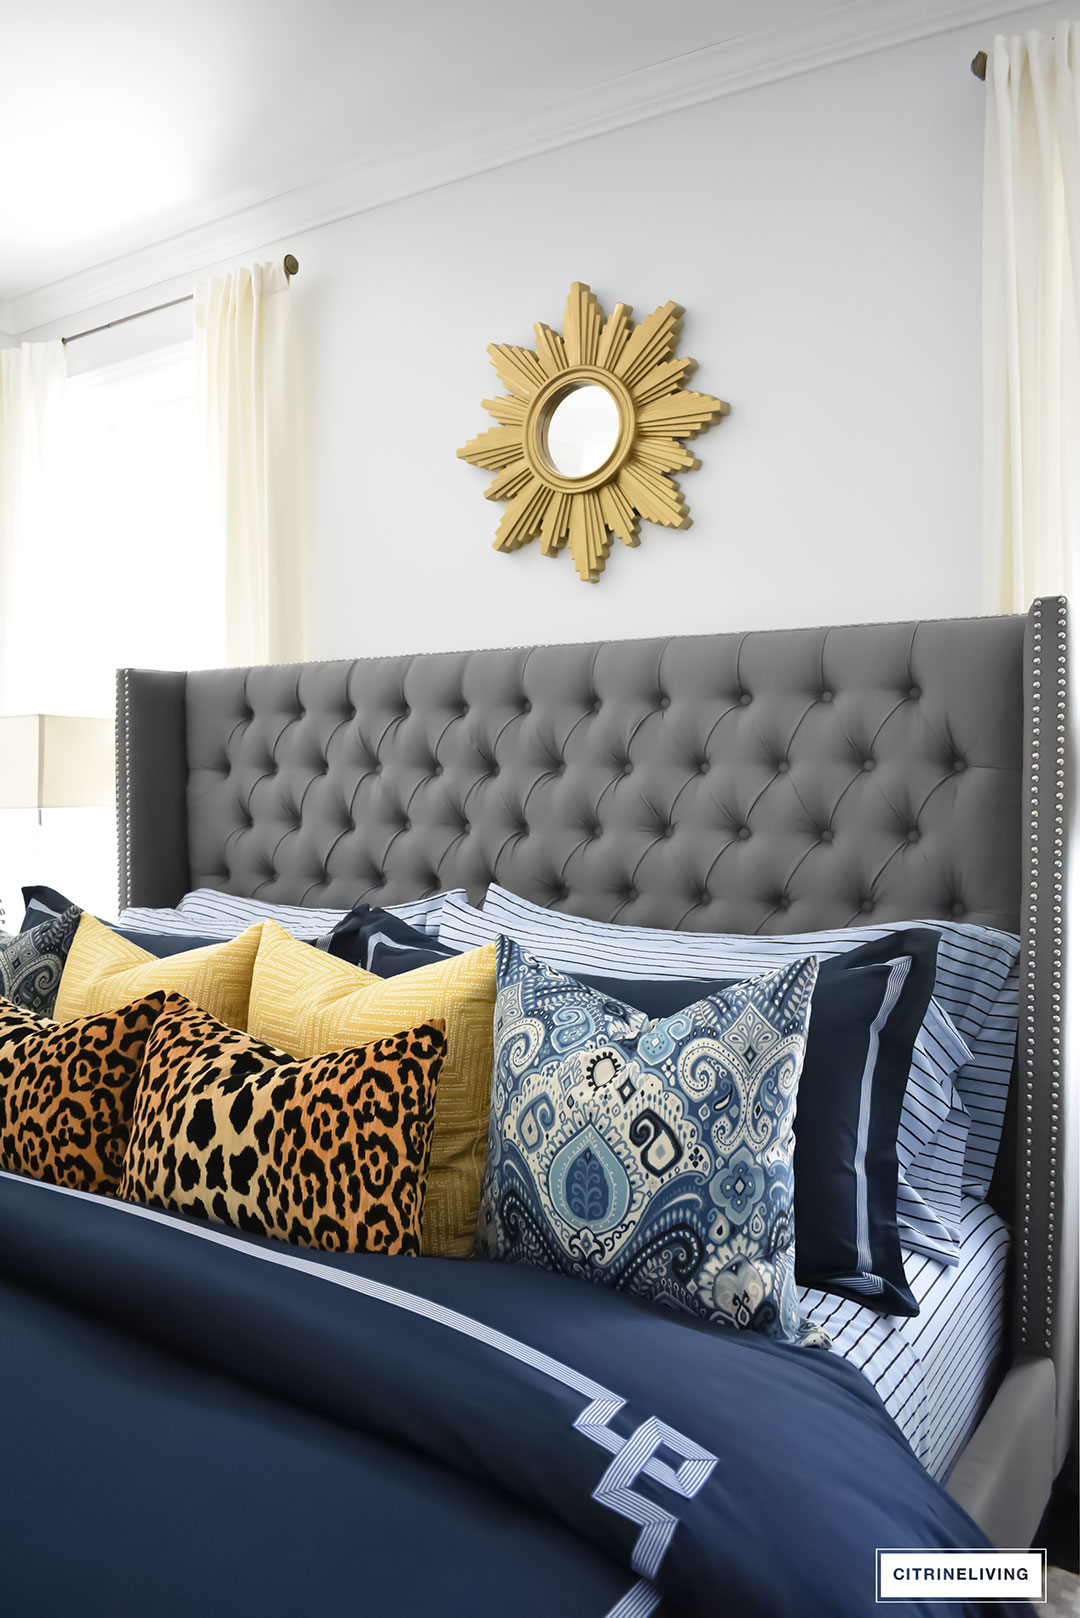 Gorgeous Blue Fall master bedroom - A masculine meets glam look with navy blue, stripes, paisley ikat, greek key, leopard and gold - perfectly tailored and chic!